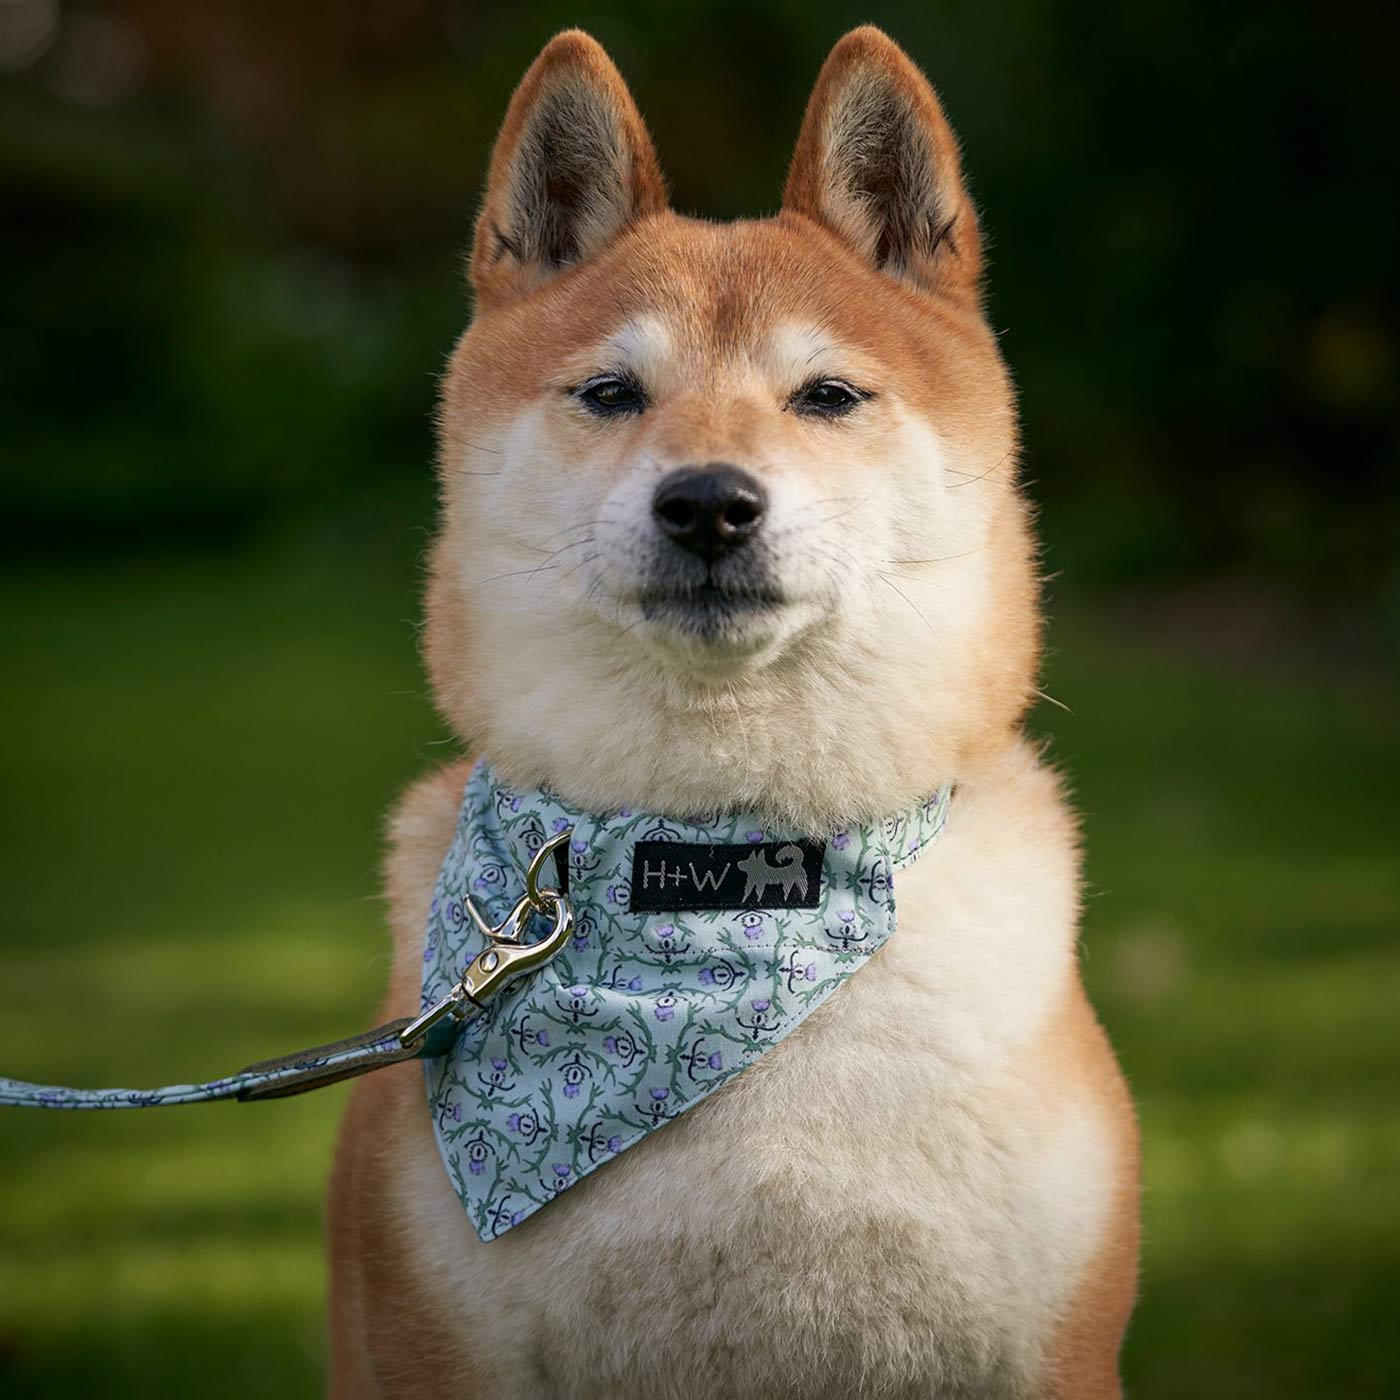 [color:stag] Set & accessorize your pooch ready for a stylish dog walk with Hiro + Wolf X L&L Dog Bandana, the perfect dog walking accessory! Made using strong webbing lining to provide extra strength! Available in 3 stylish designs and 2 sizes at Lords & Labradors US